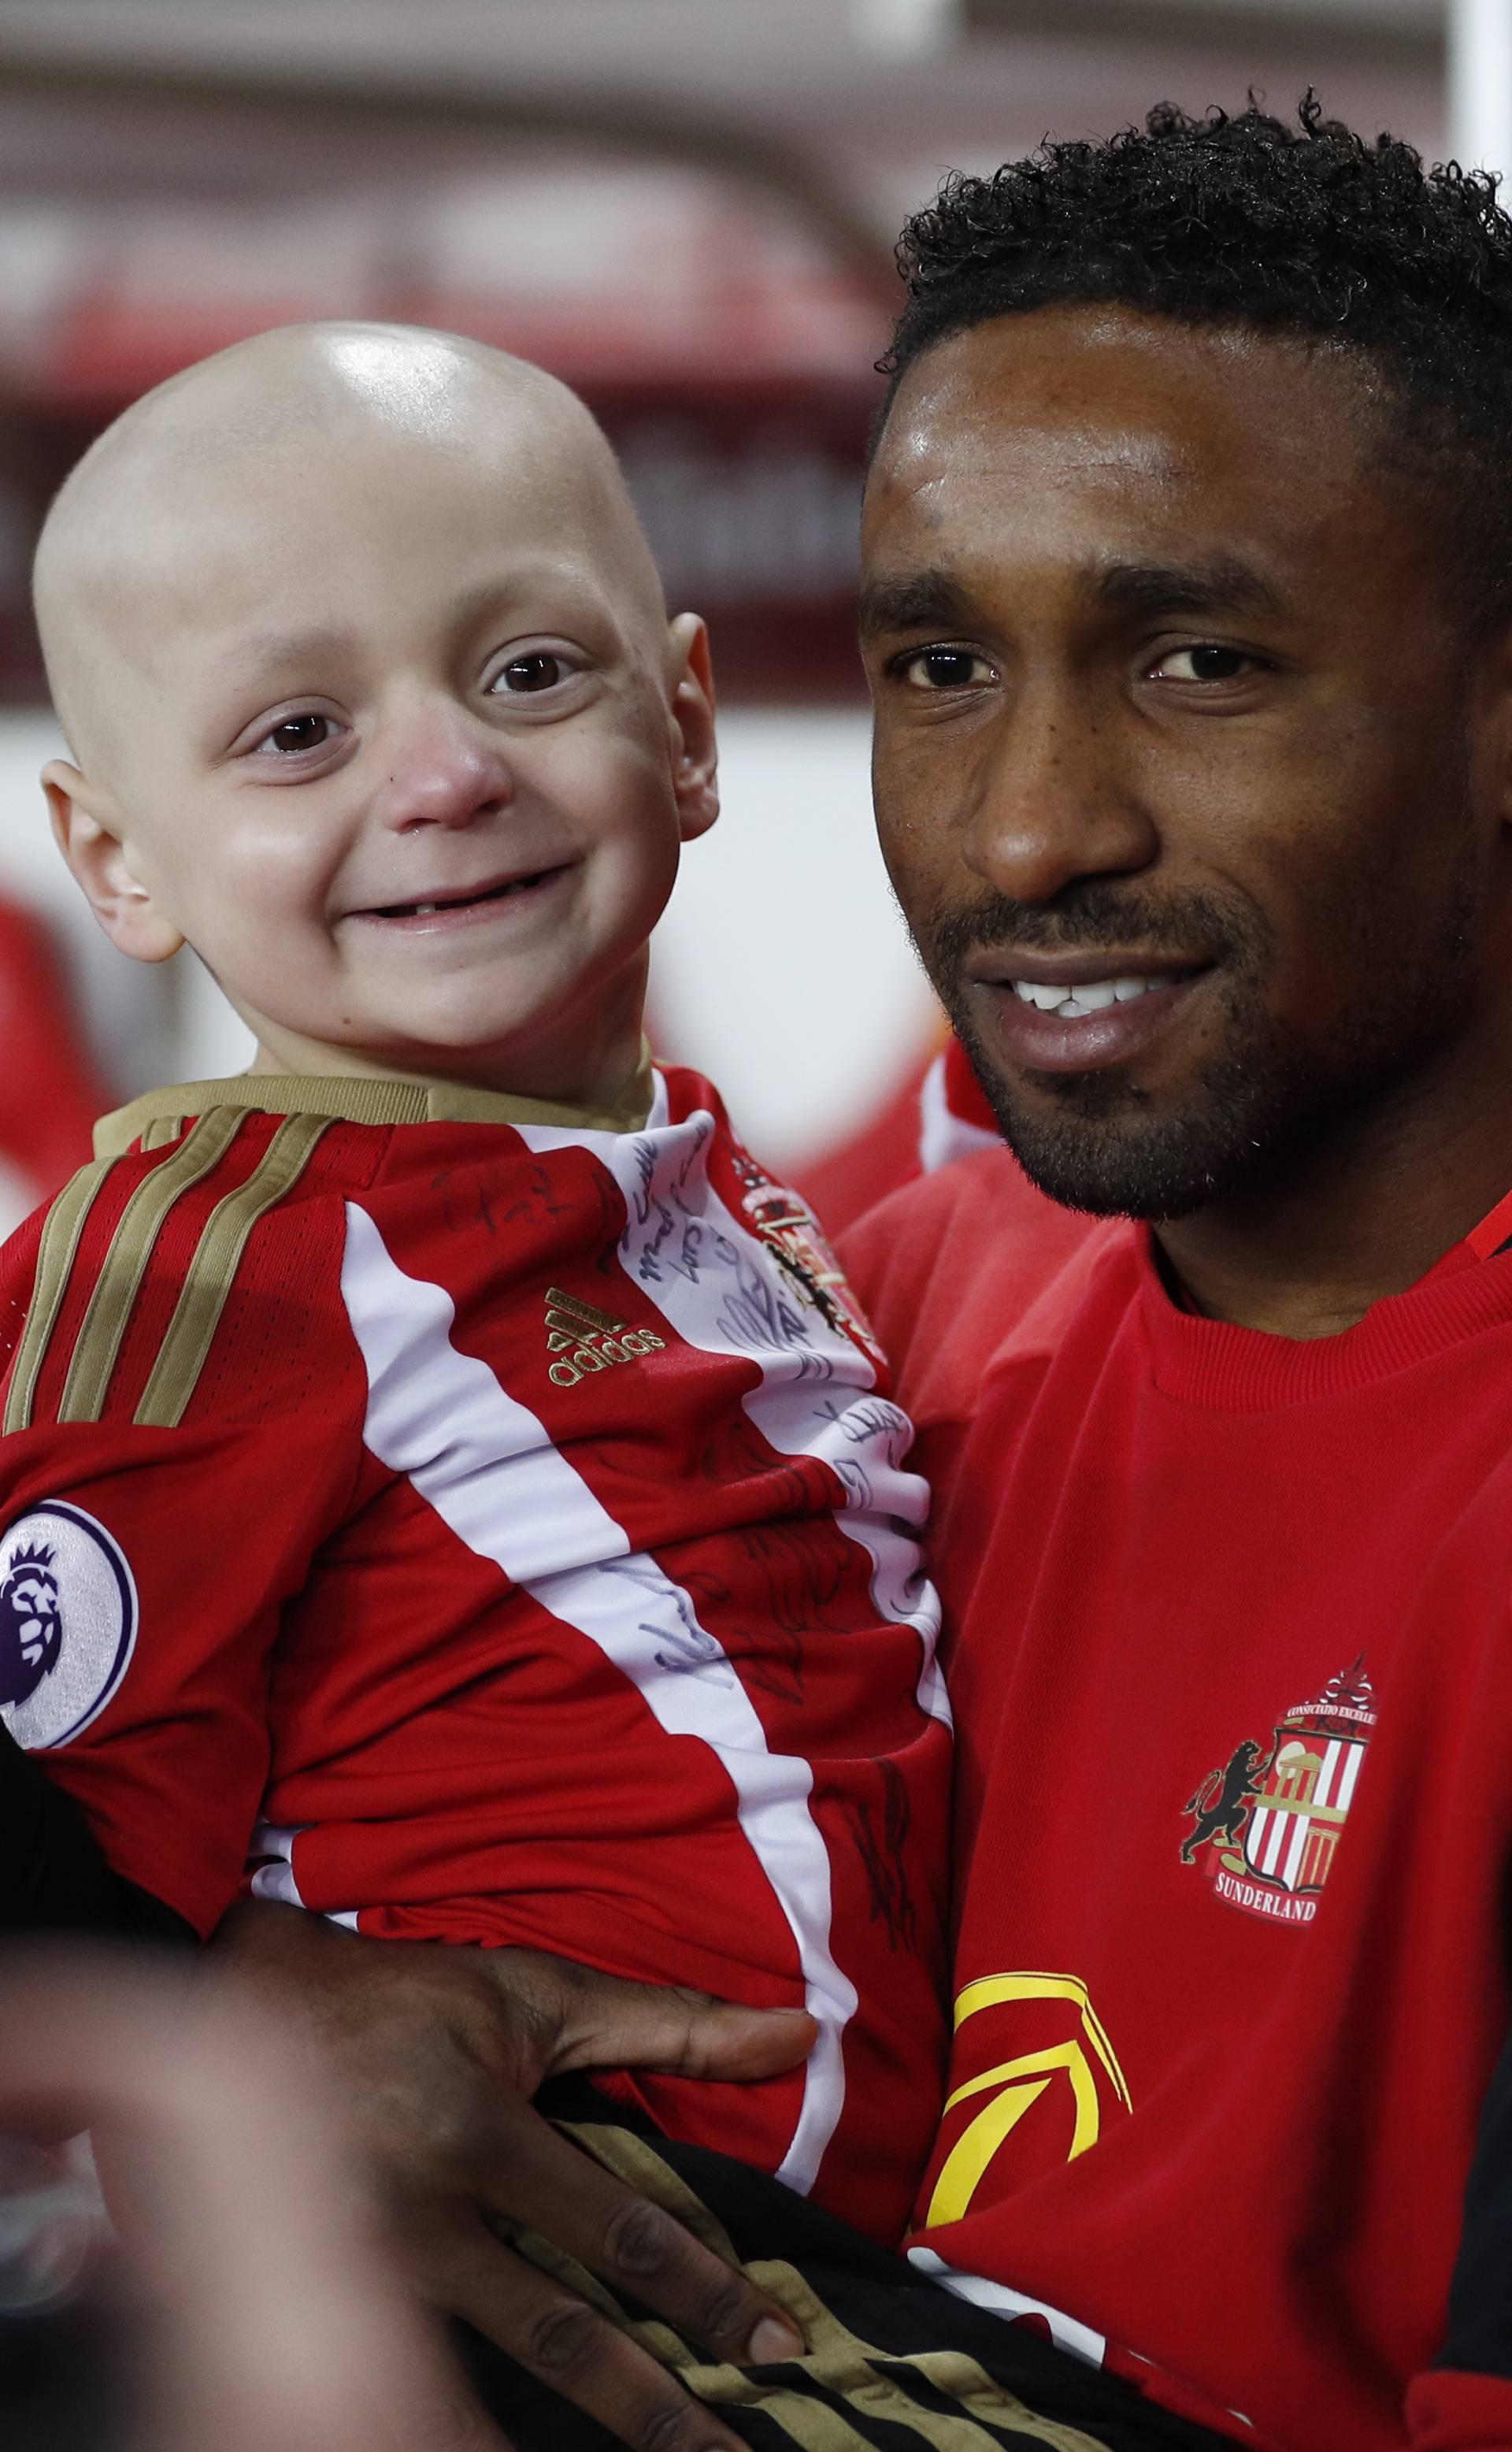 Sunderland's Jermain Defoe and mascot Bradley Lowery pose for a photo before the game